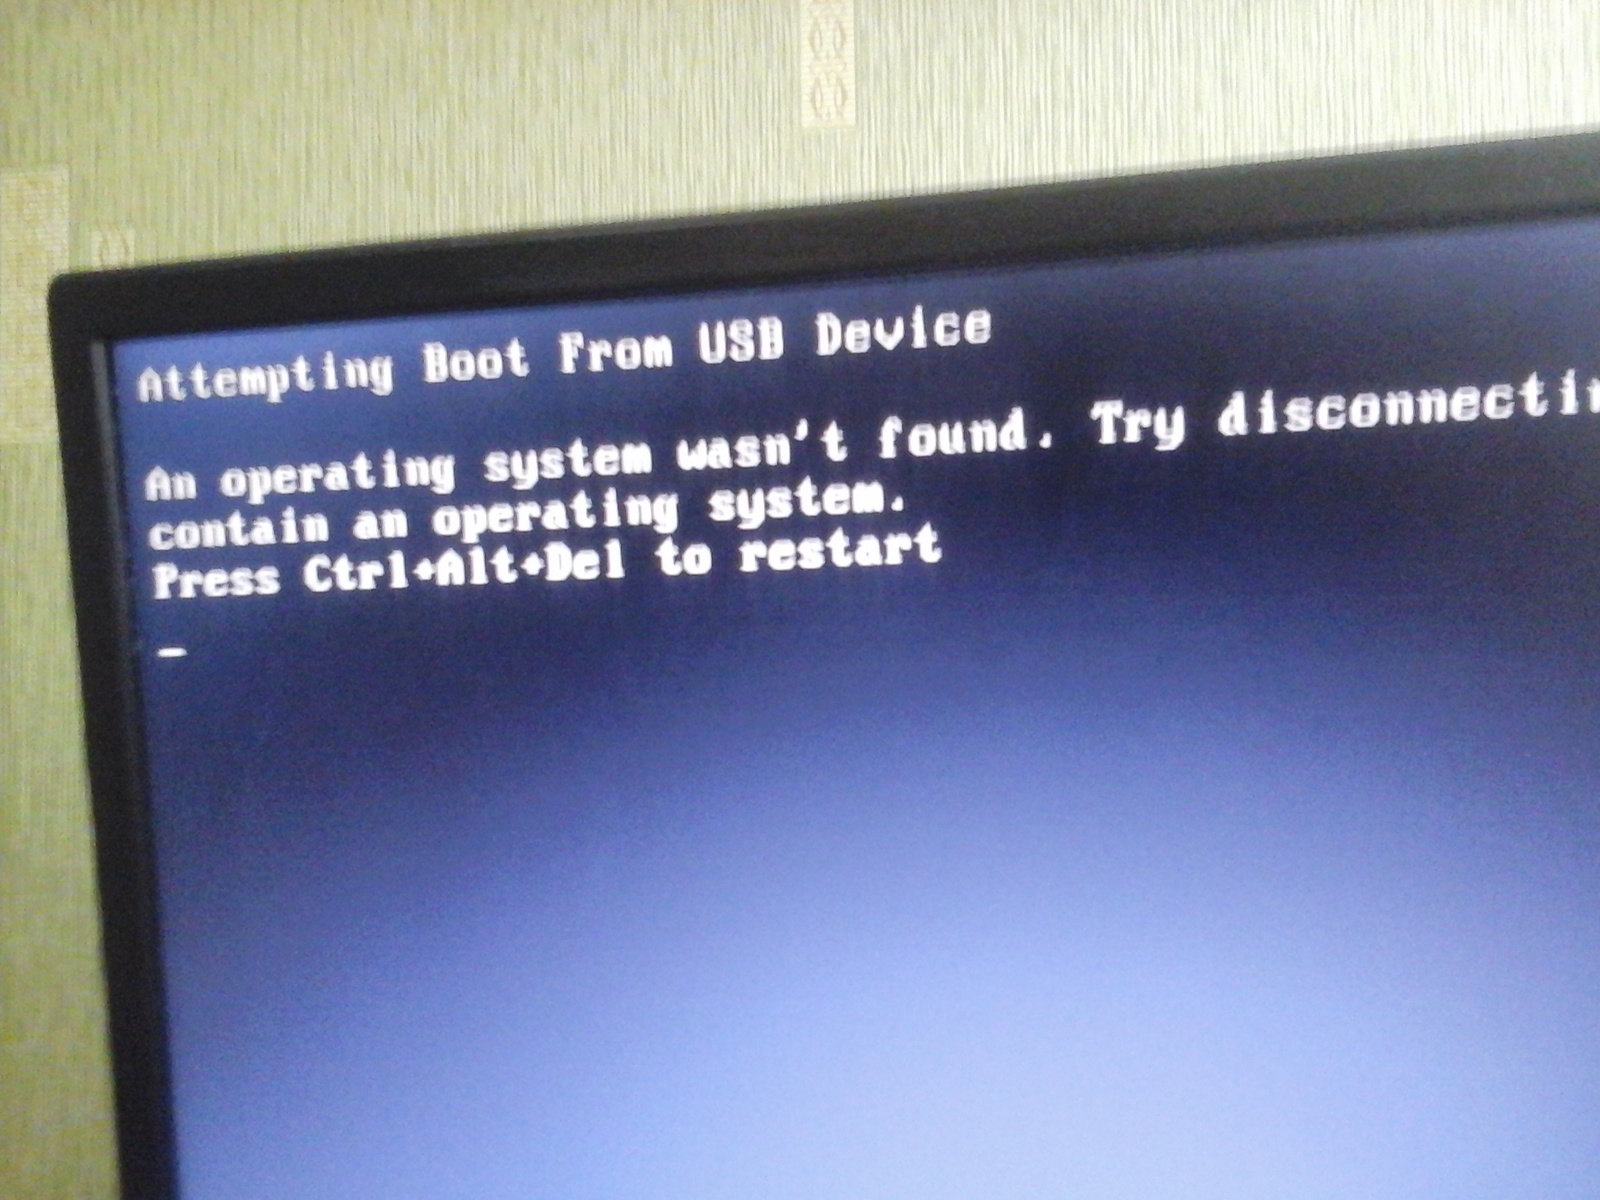 Boot attempt. Переустановка с образом\. Press any Key to Boot from USB pic. An operating System wasn't found try disconnecting any Drives that don't contain an operating System.